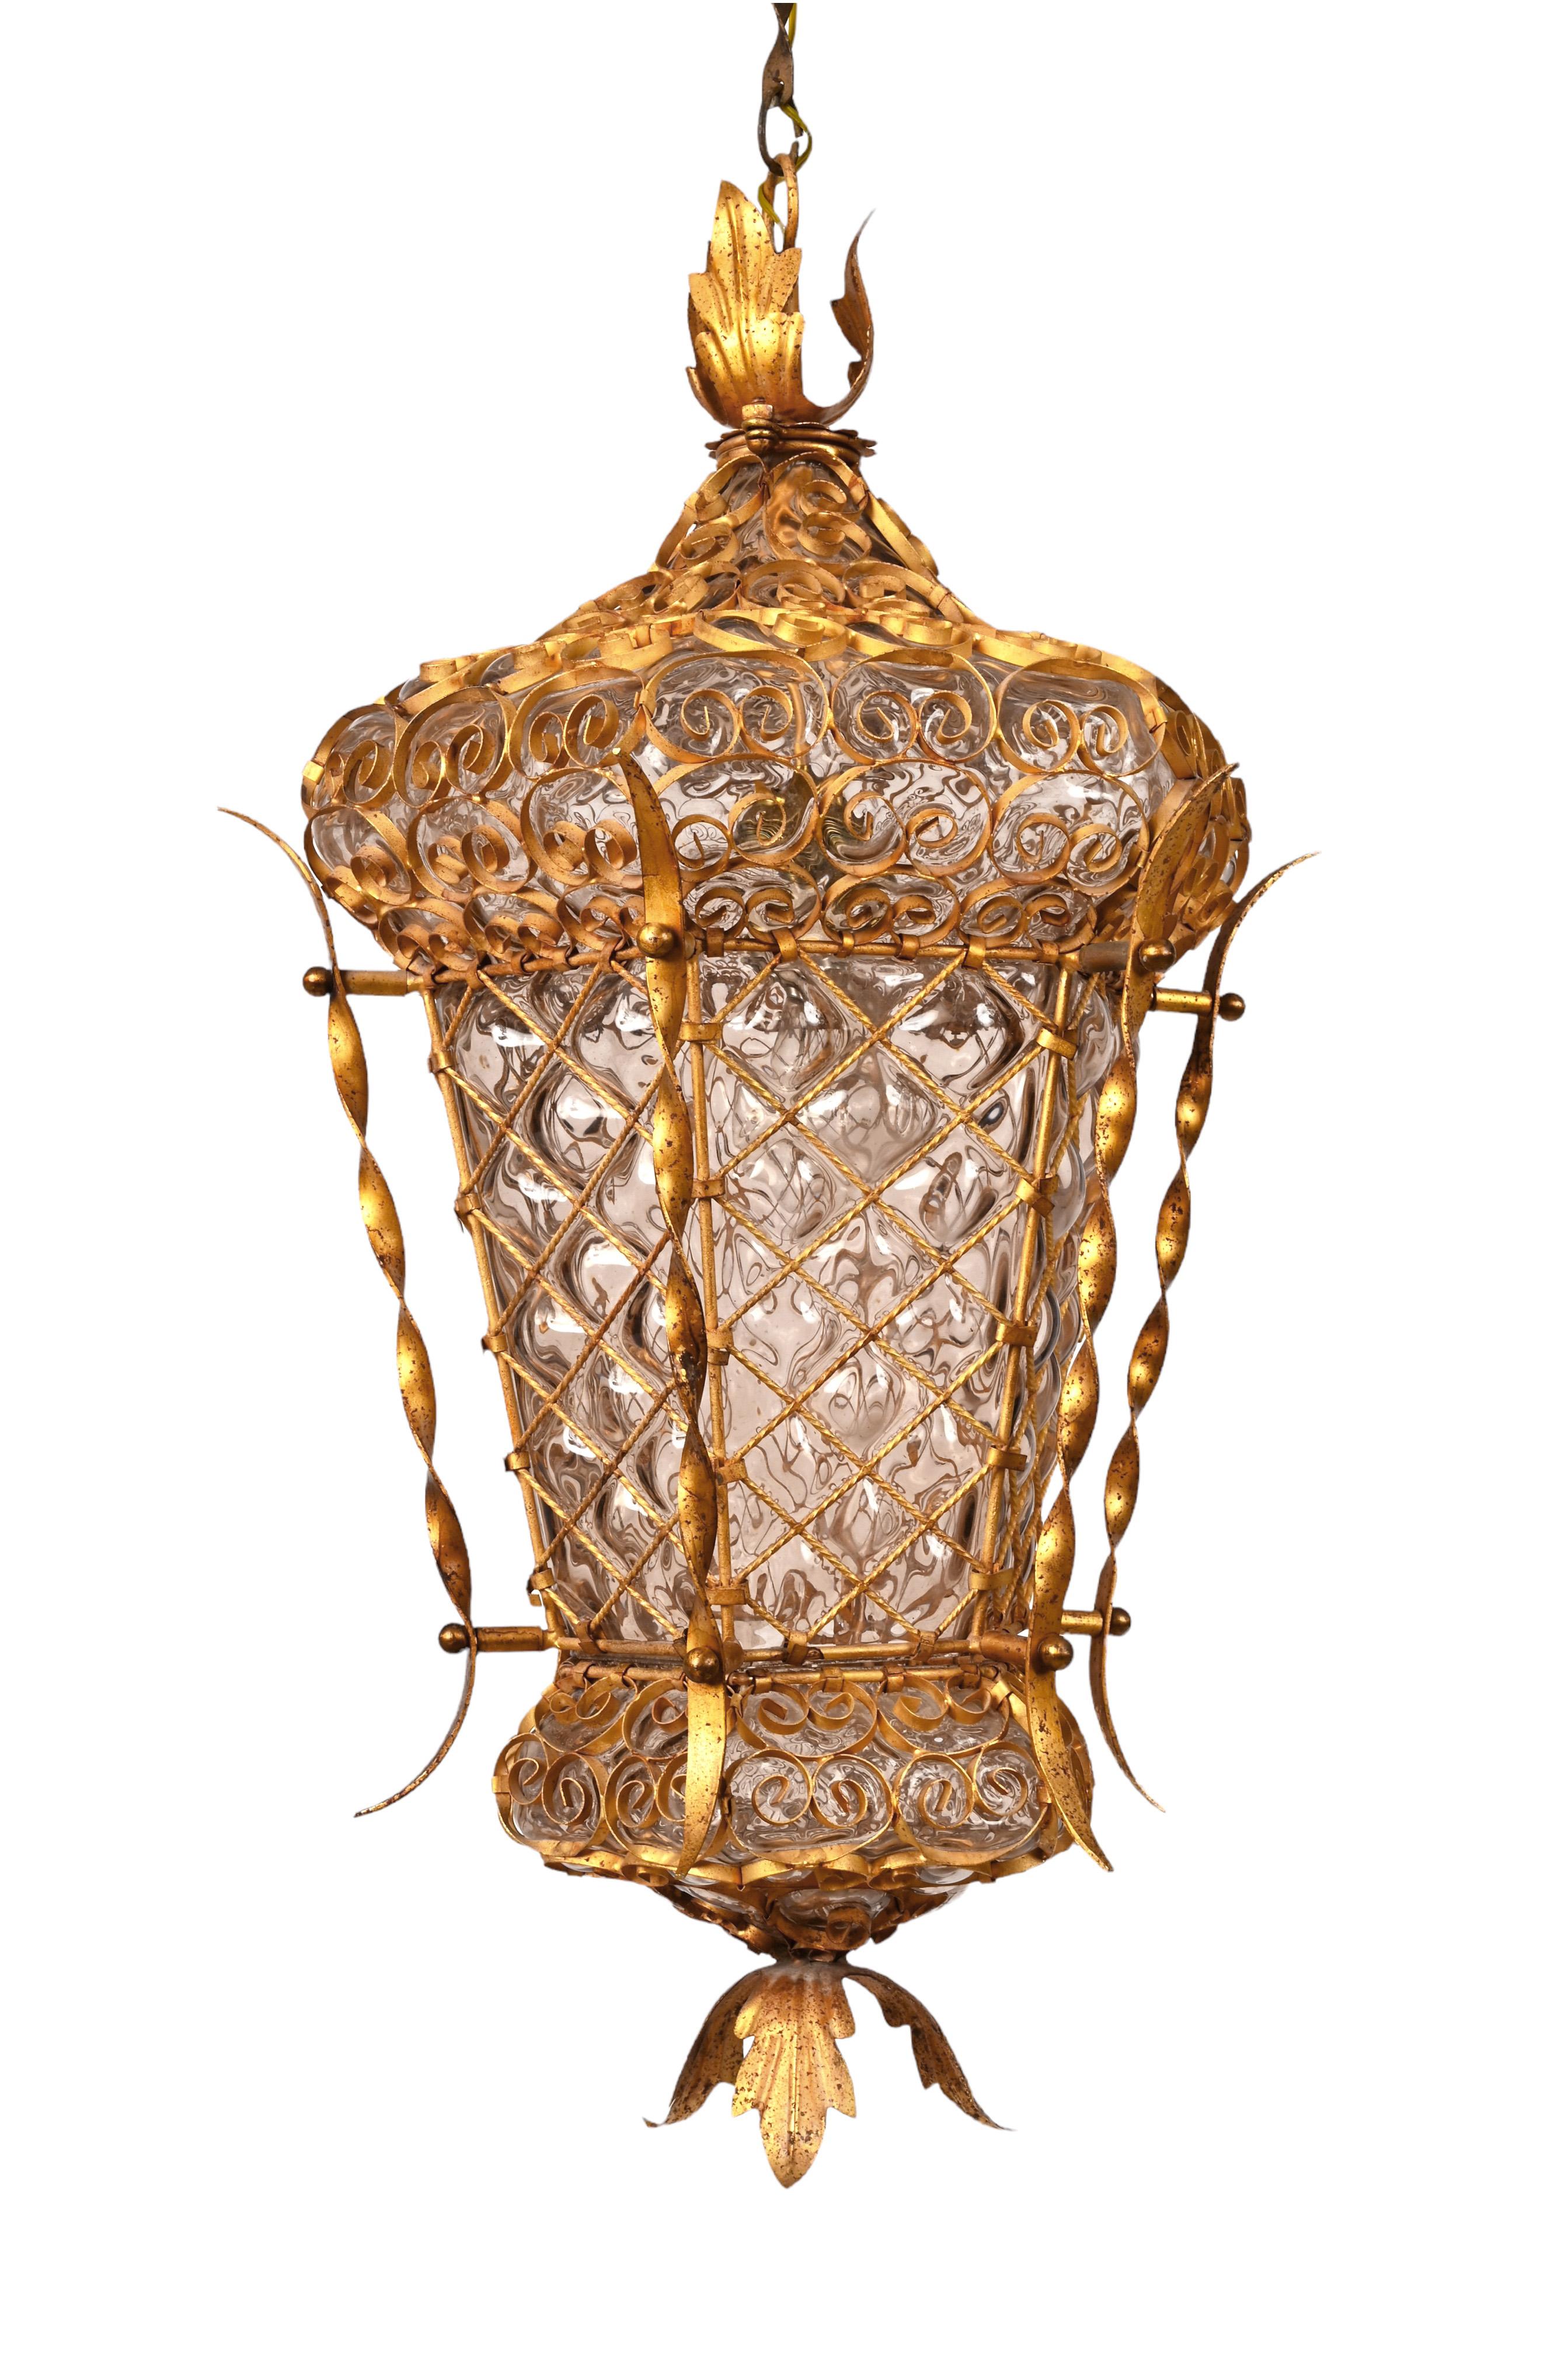 Italian Midcentury Venetian Mouth Blown Glass in Gold Painted Metal Frame Lantern, 1940s For Sale